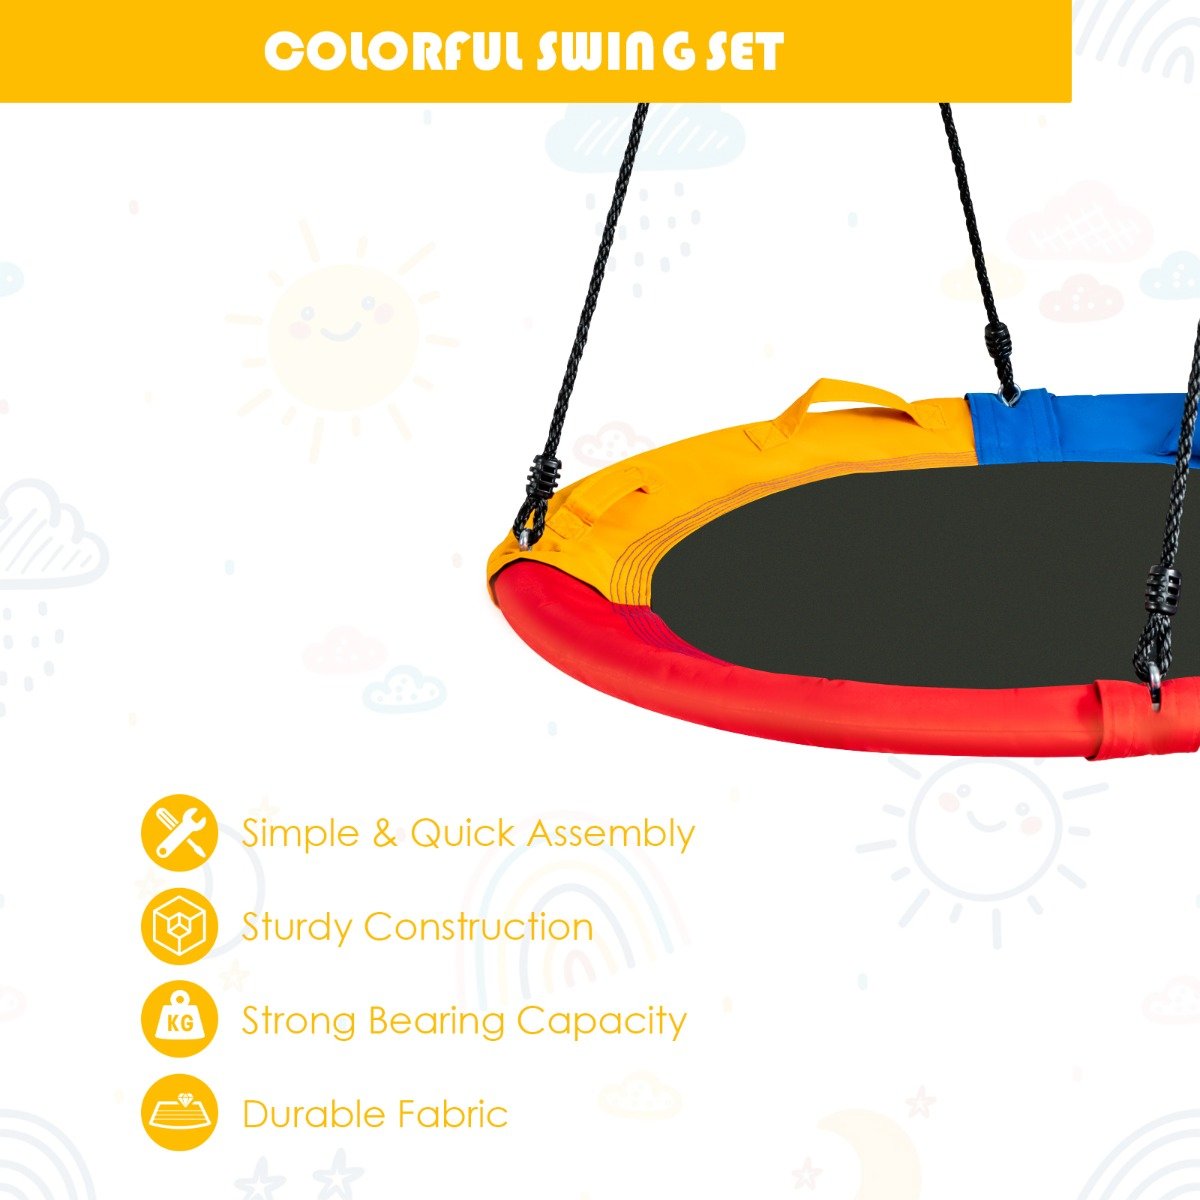 Outdoor Fun with colourful Saucer Tree Swing: Round Platform for Kids